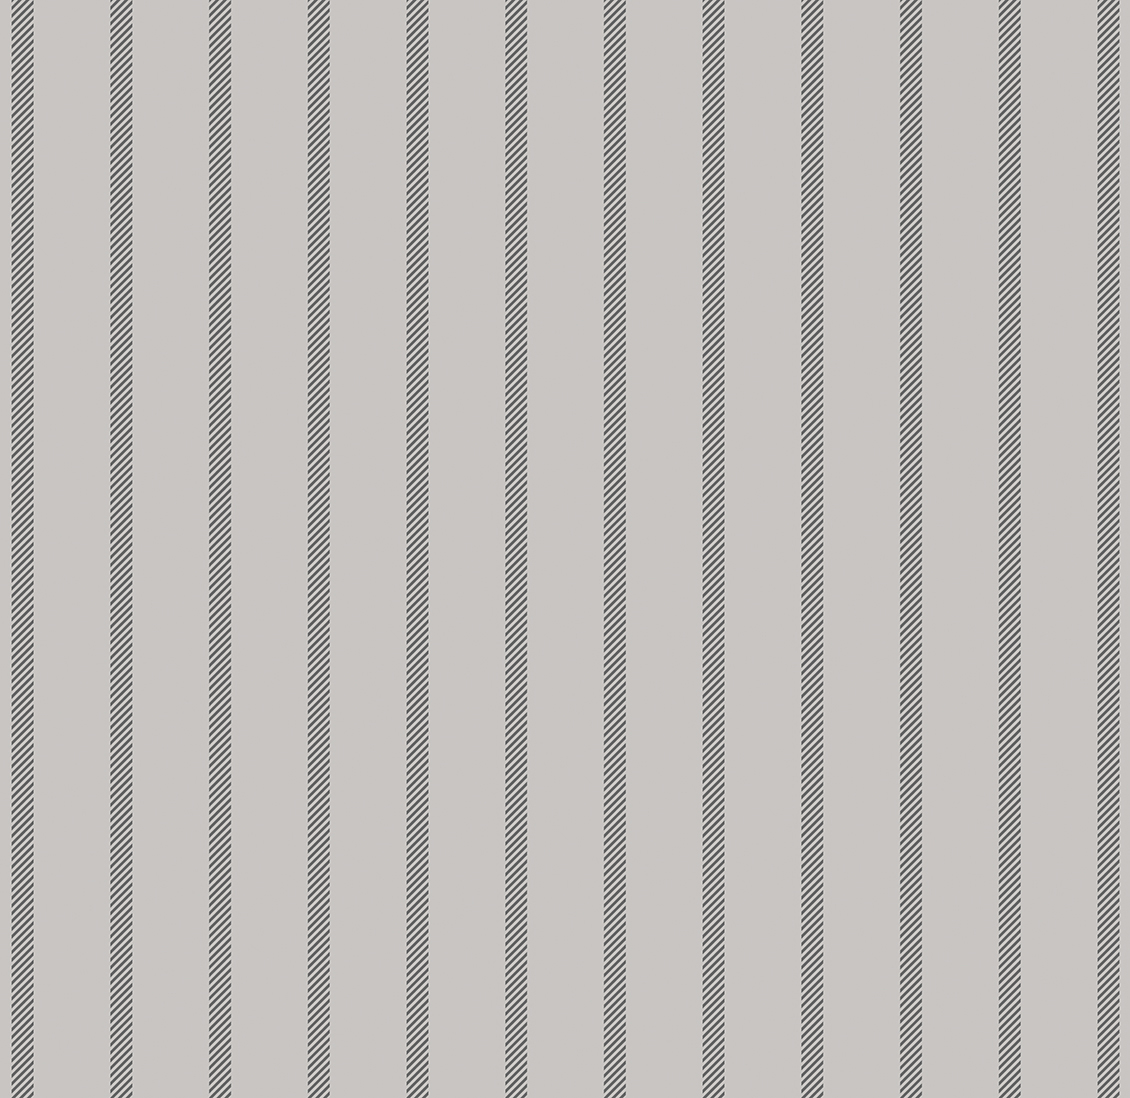 Wallpaper with grey vertical stripes on a white background, pinstripe fabric effect